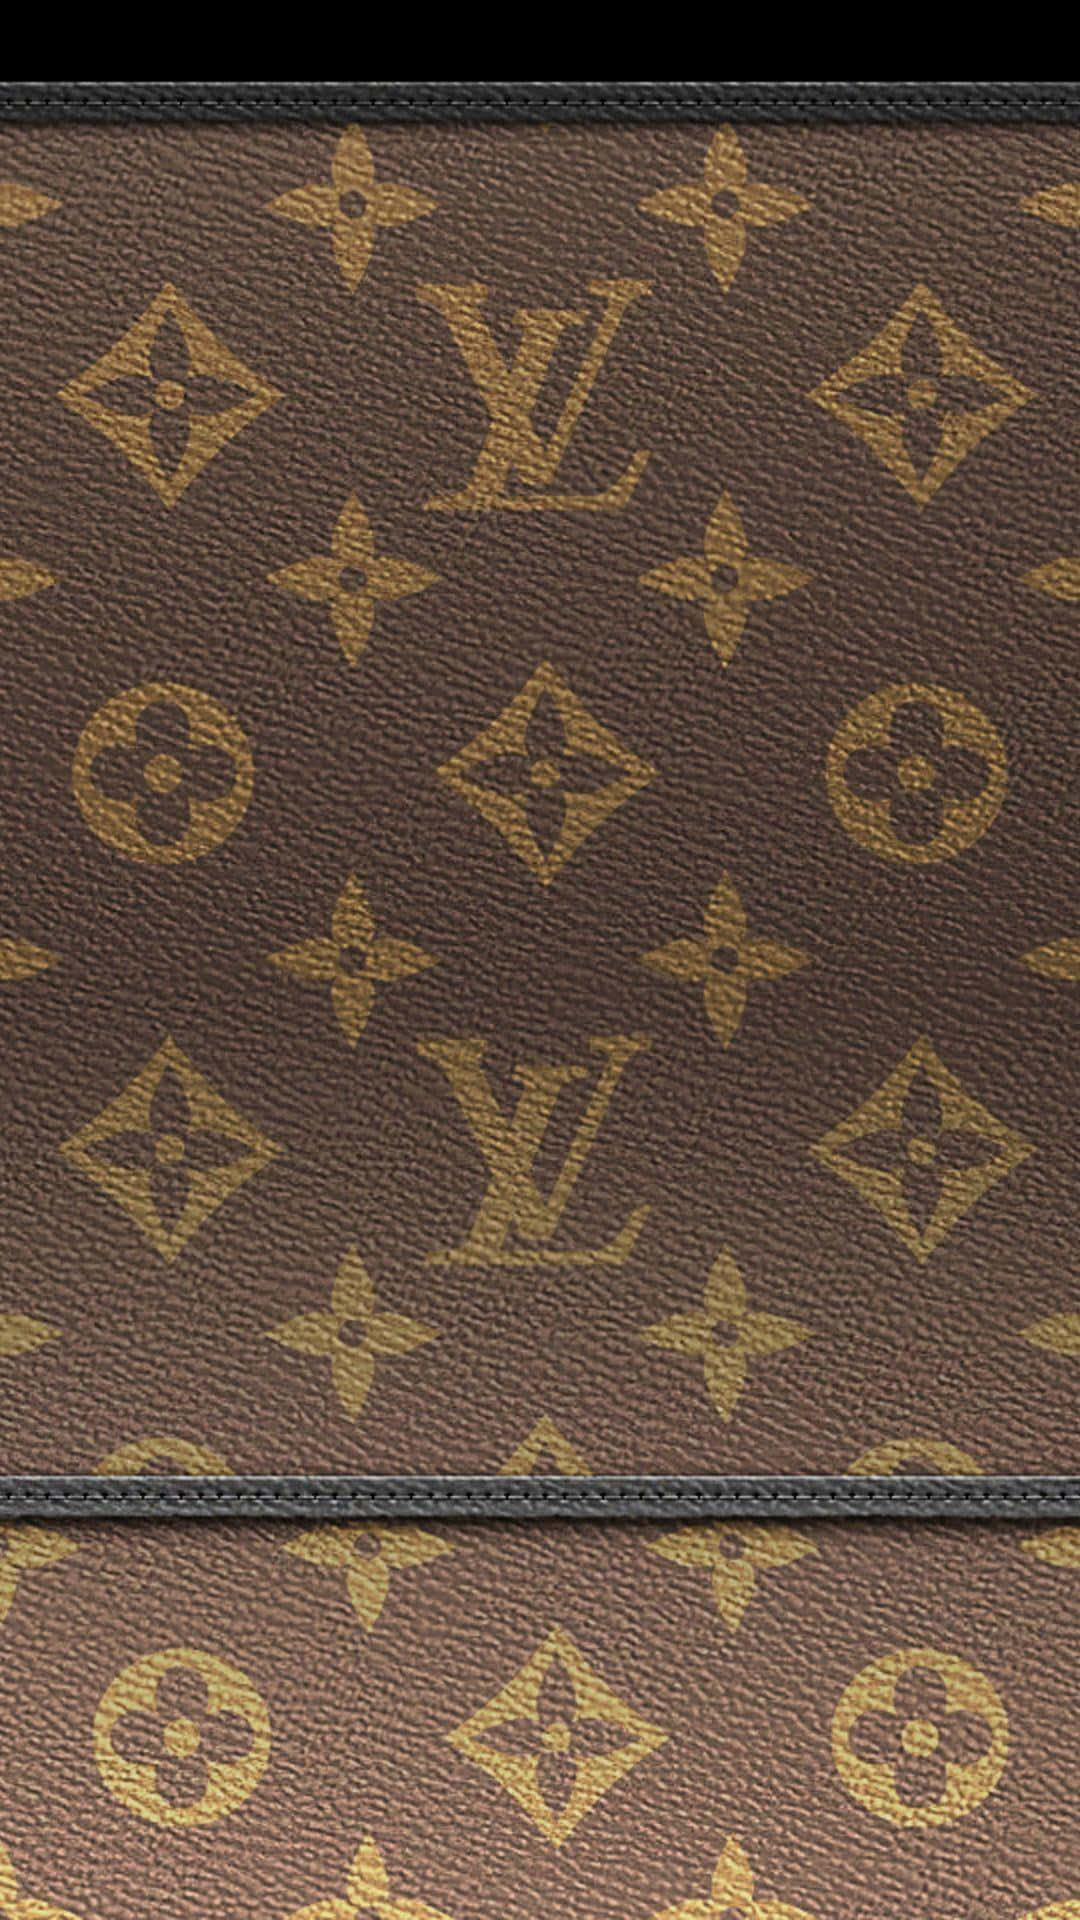 Download Obsess Over Your Style with Louis Vuitton 4k Wallpaper